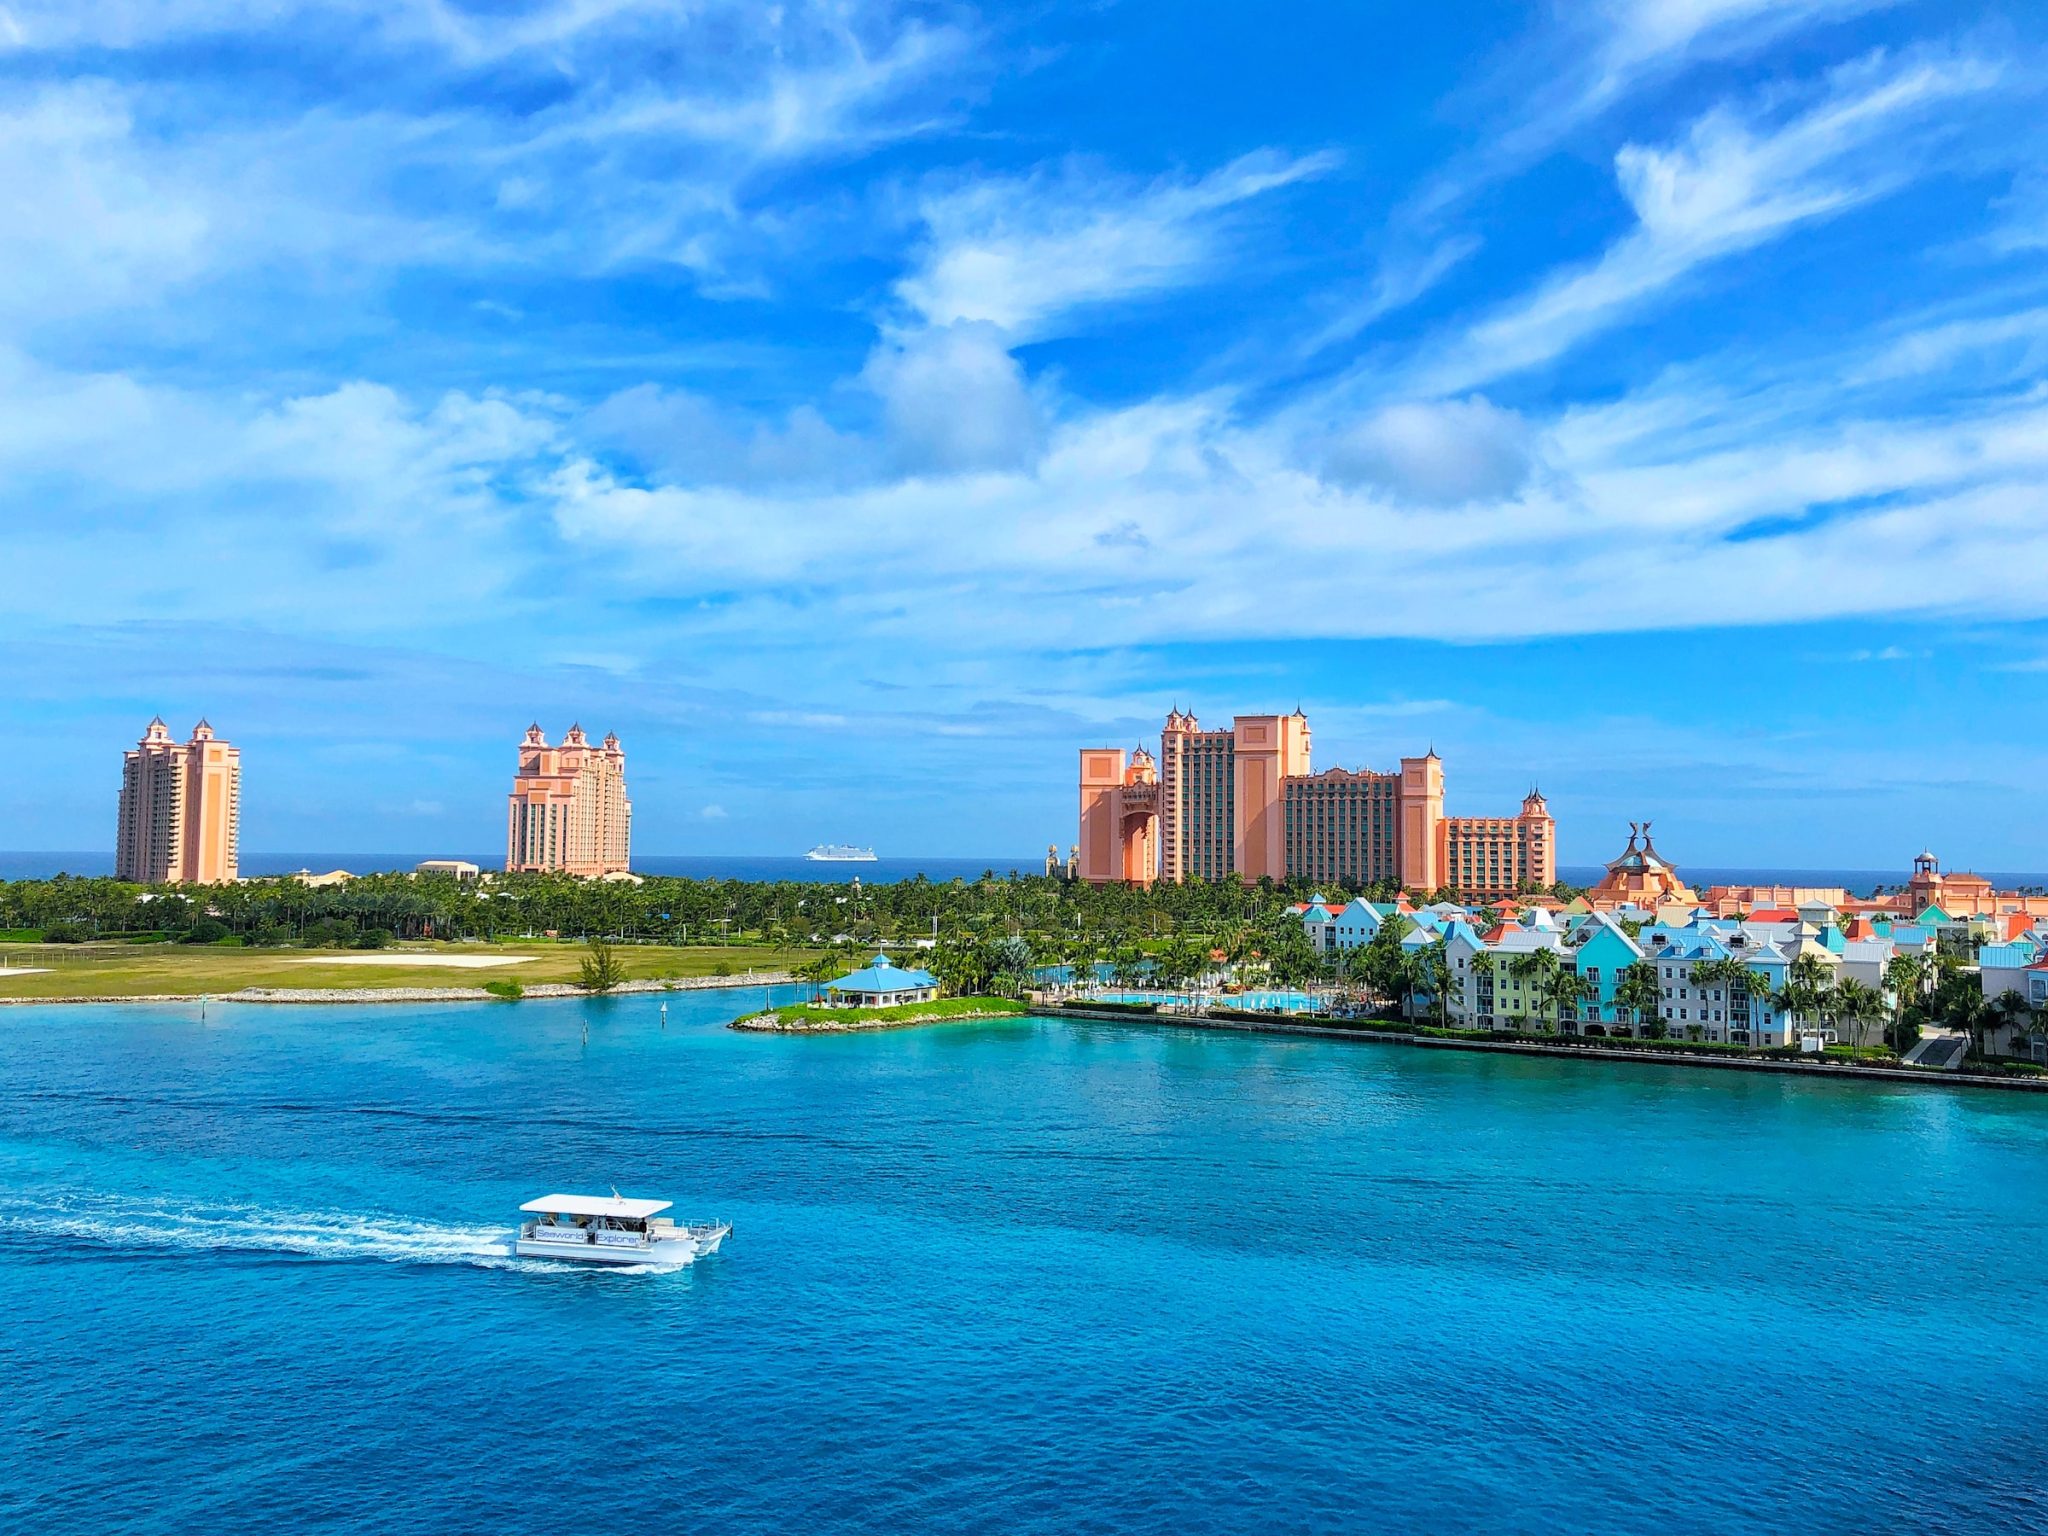 Escape the winter blues and embrace tropical bliss: a family getaway to the bahamas